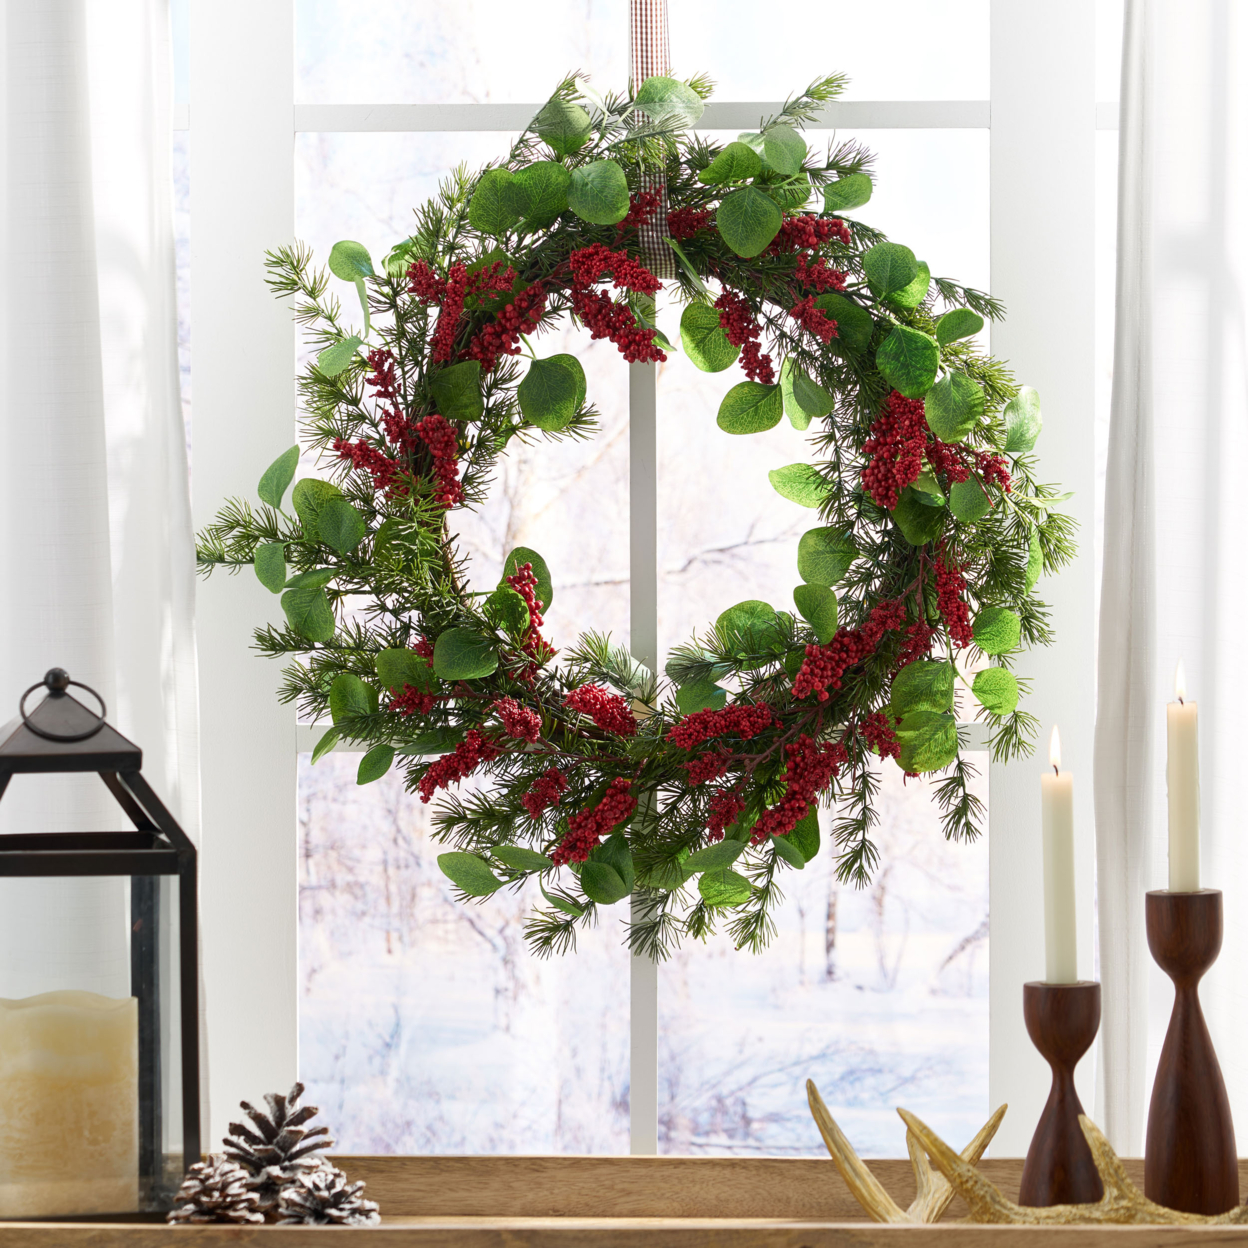 Davian 25.5 Inch Eucalyptus And Pine Artificial Wreath With Berries - Green + White